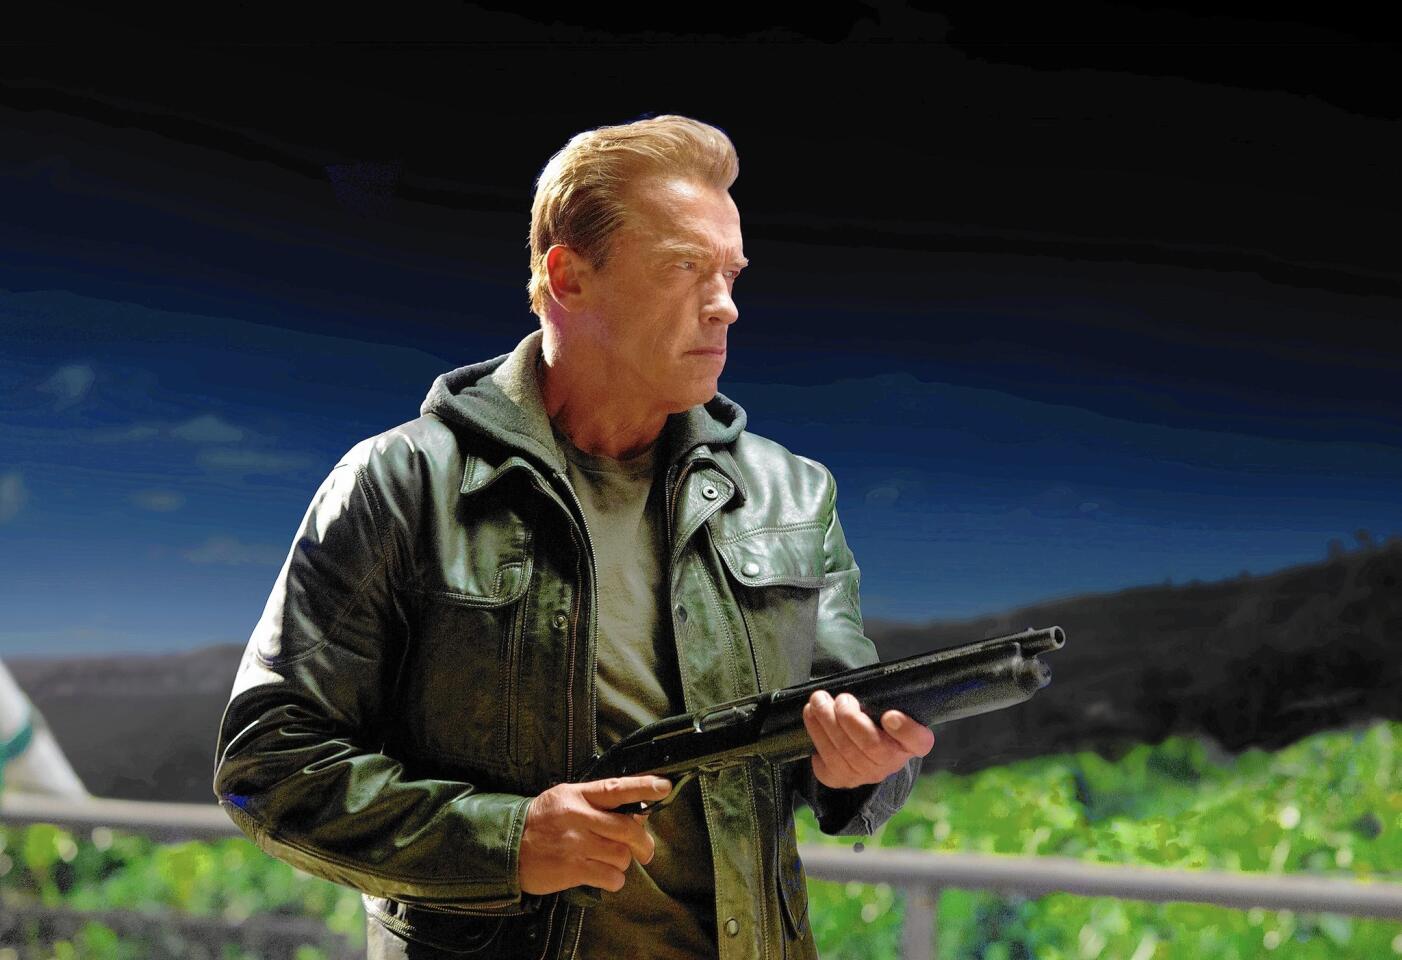 Arnold Schwarzenegger beats up Arnold Schwarzenegger in this flop that, thanks to China and other key overseas markets, flopped its way into hit status. Read the "Terminator Genisys" movie review.